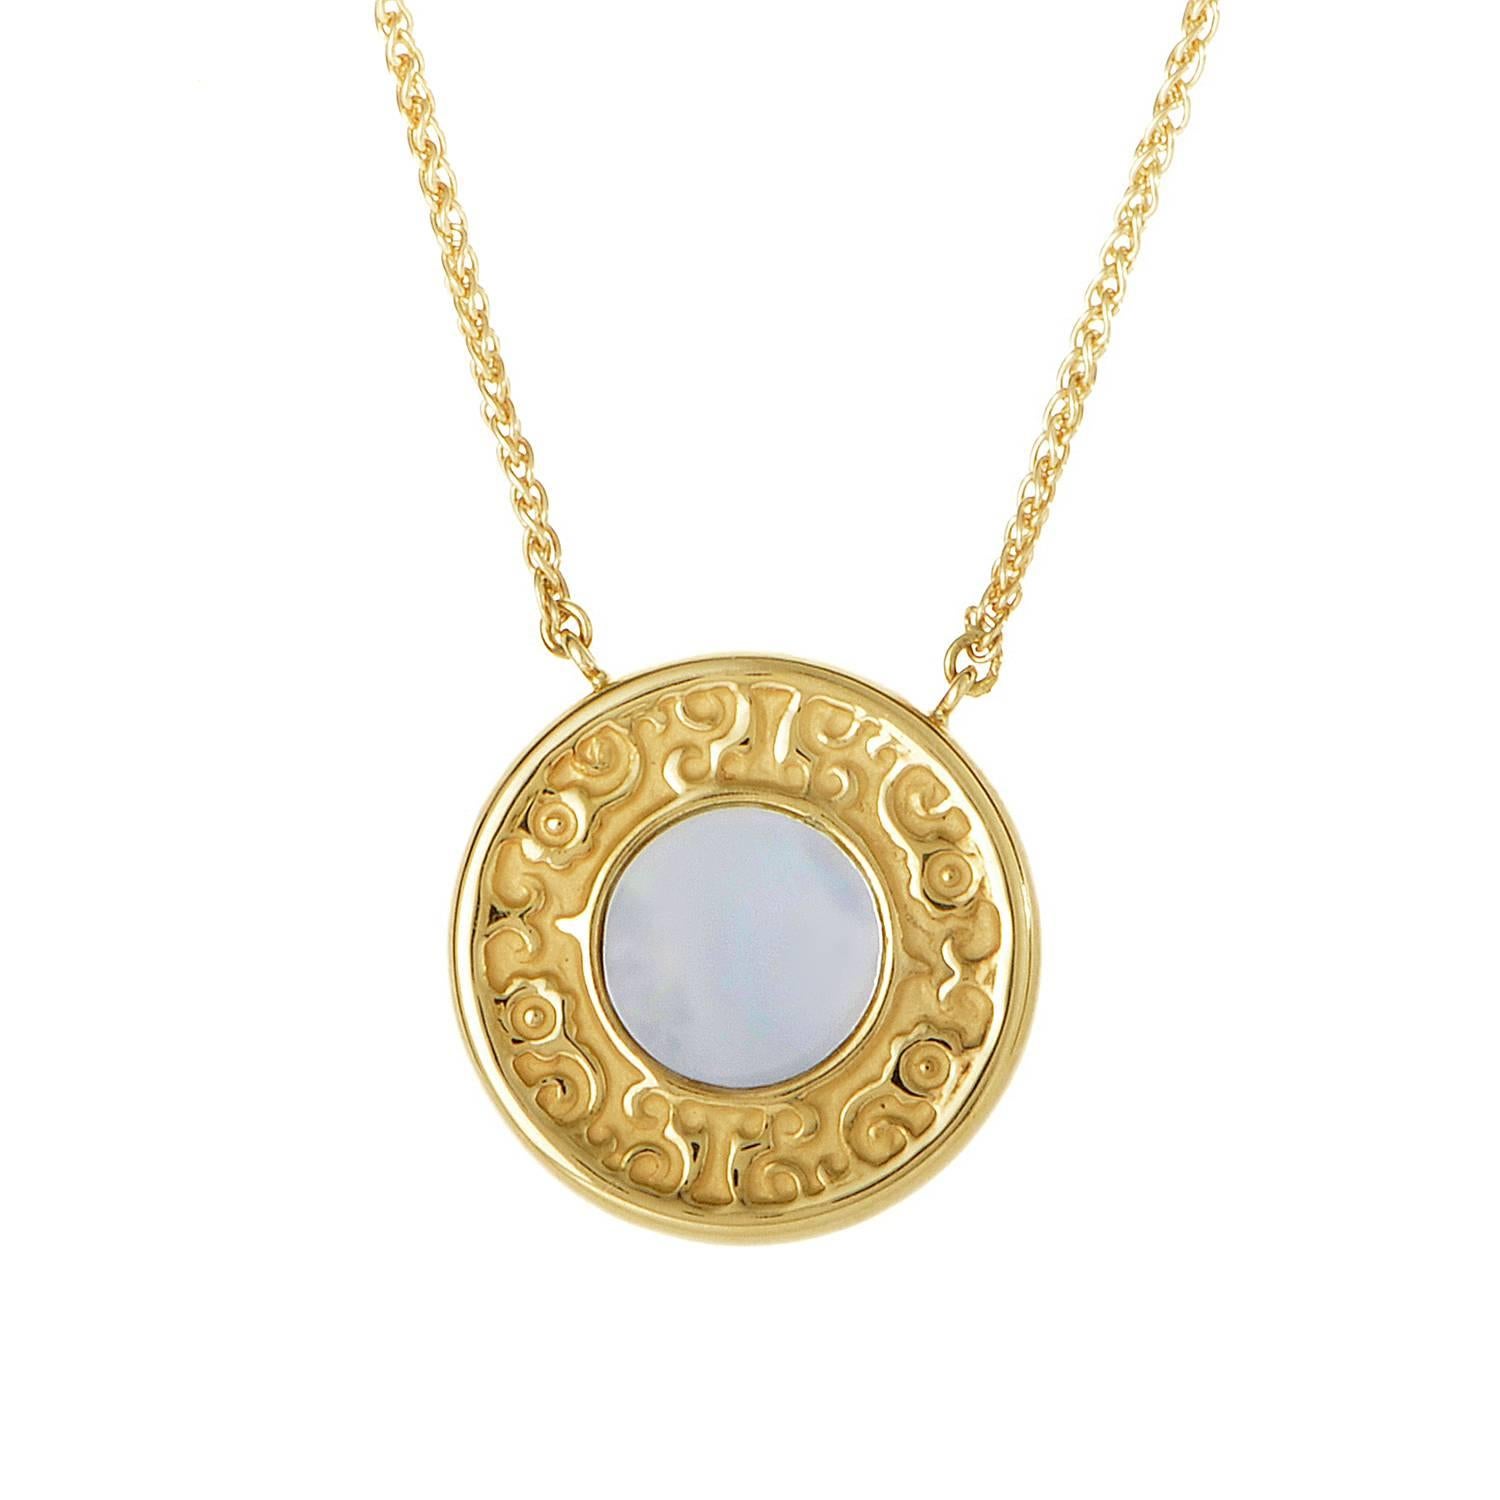 A heady mix of detail and simplicity is expertly stirred into this pendant necklace from Carrera y Carrera. 18K Yellow Gold is spun into spherical perfection, a woven pattern trimming the perimeter. At the center of one side of the pendant is a rich